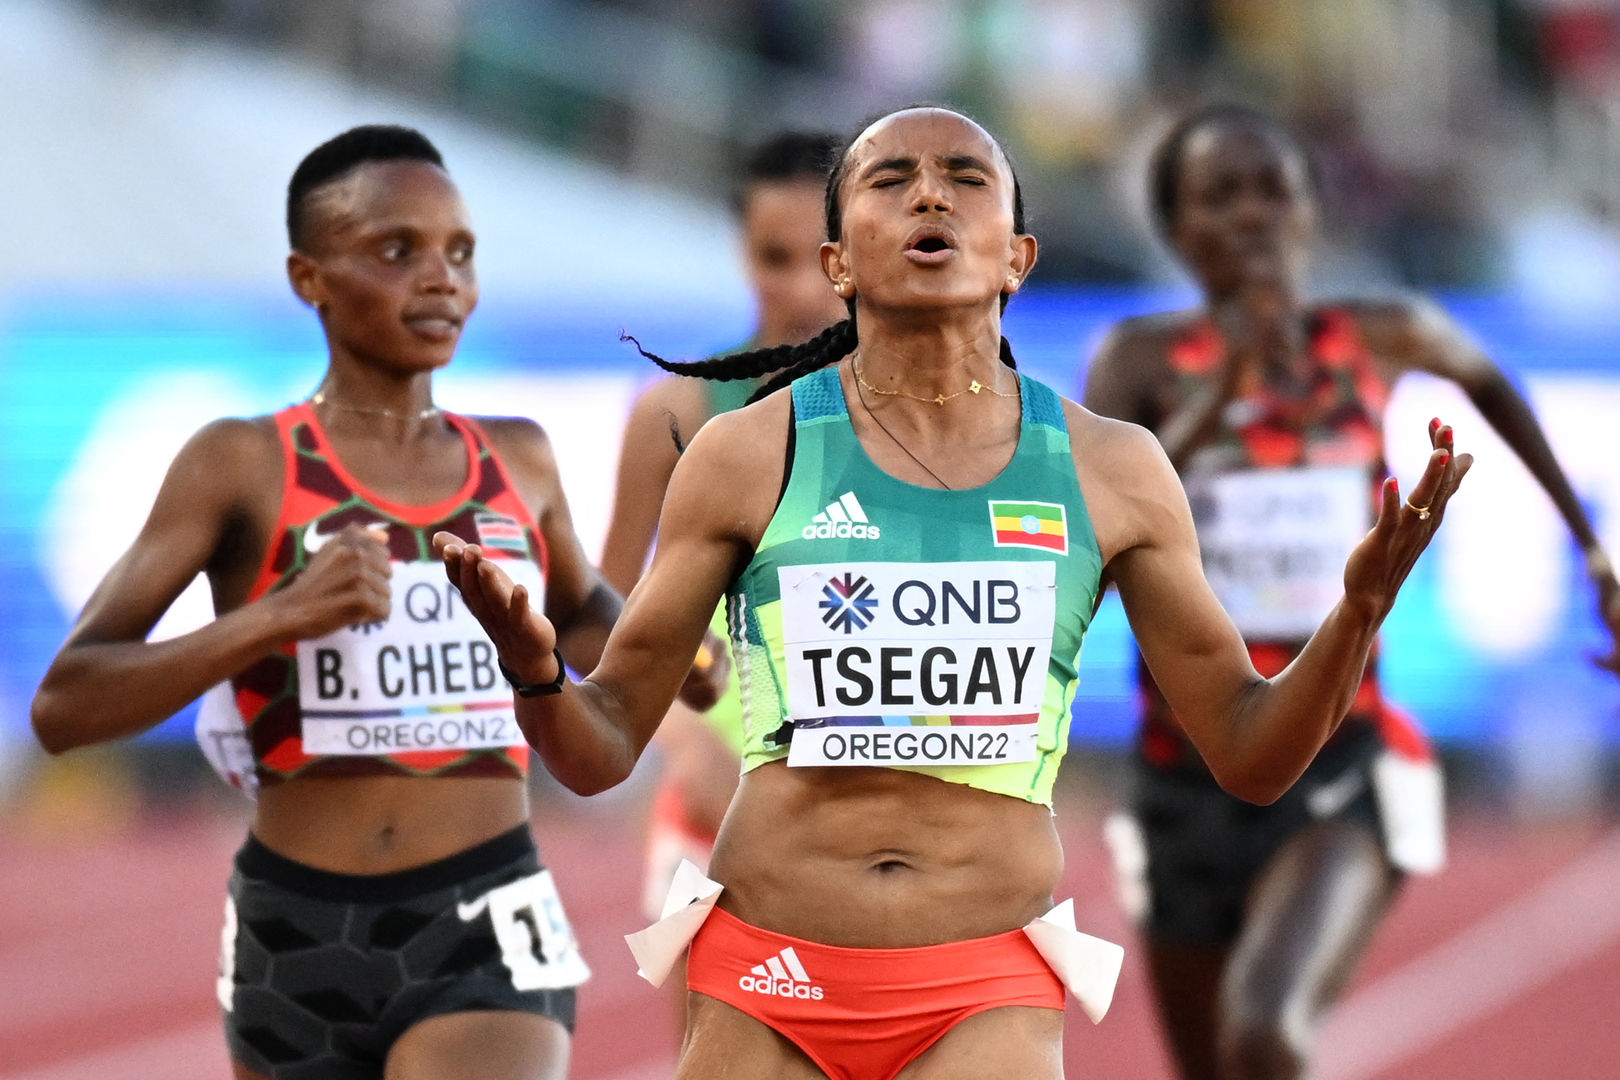 Beatrice Chebet claims silver in 5000m, Tsegay takes gold